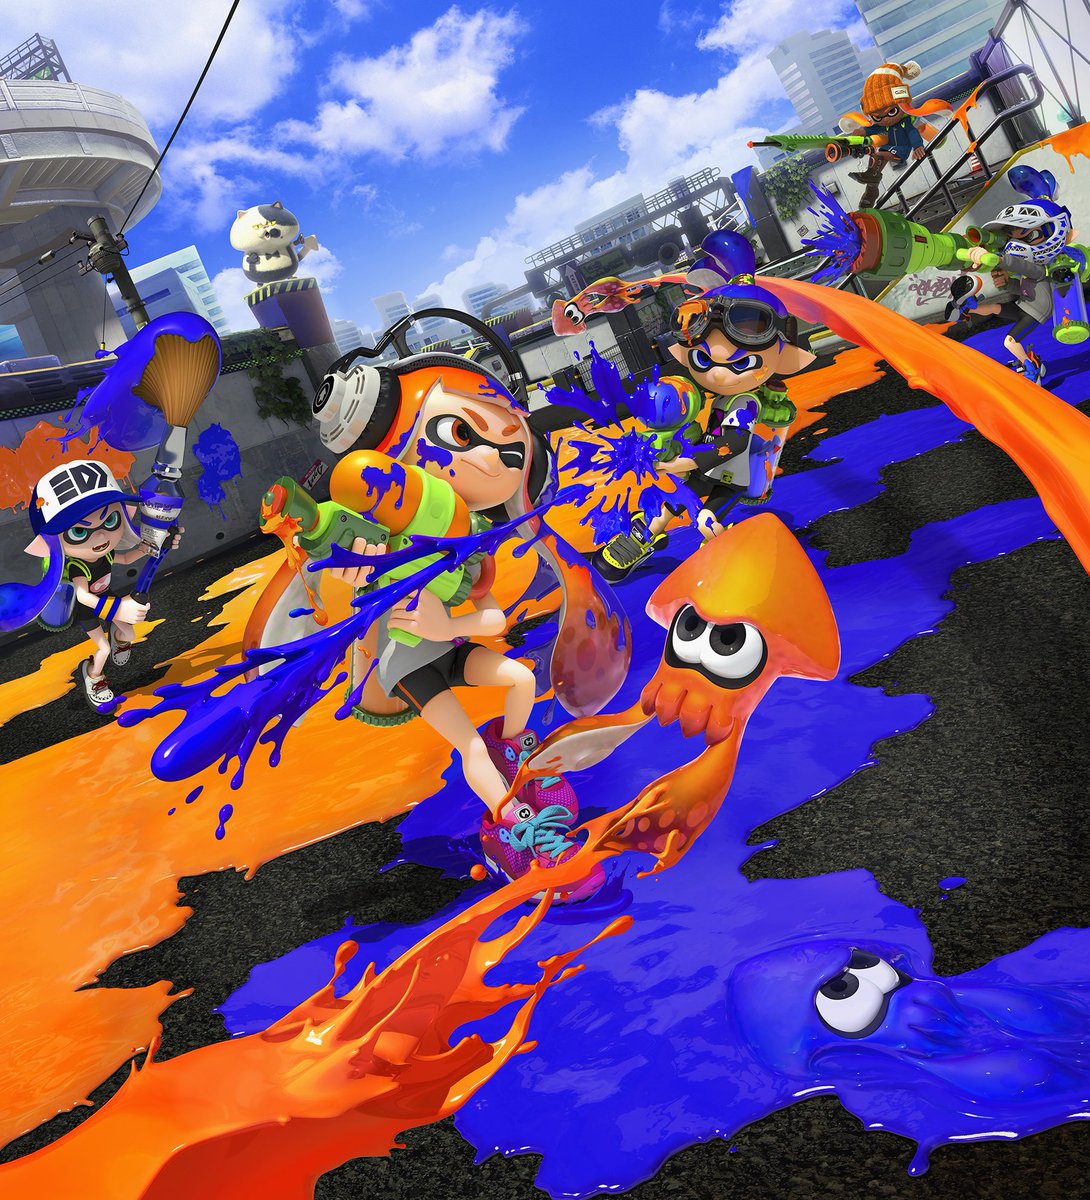 We’ve come a long way. In Wii U online’s last few hours, what will you miss most about Splatoon 1’s online play?